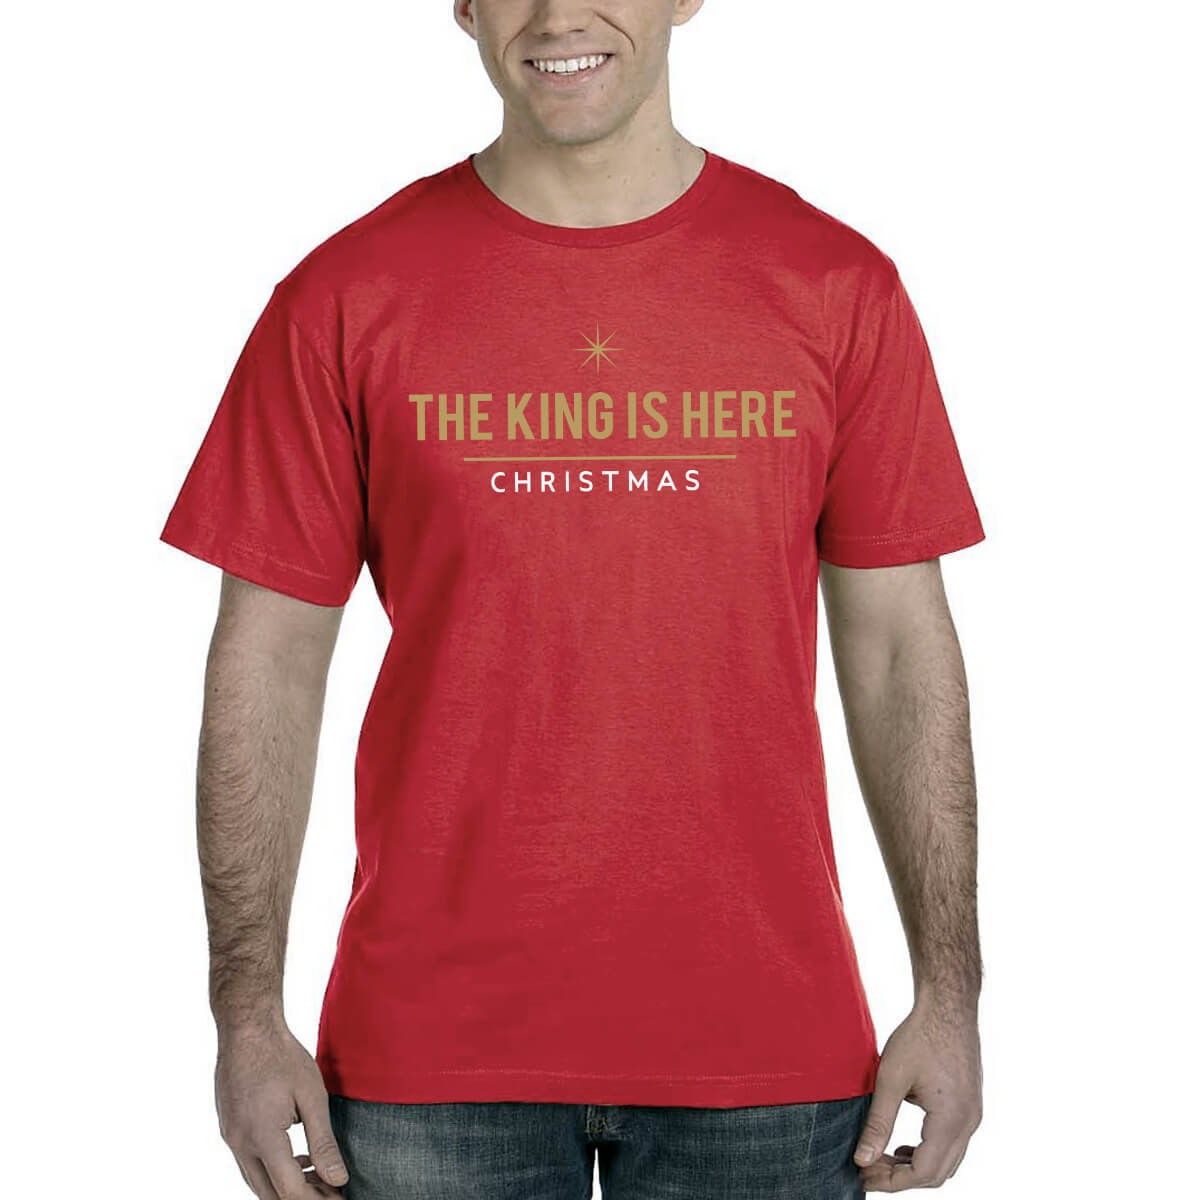 The King Is Here Christmas Men's T-Shirt